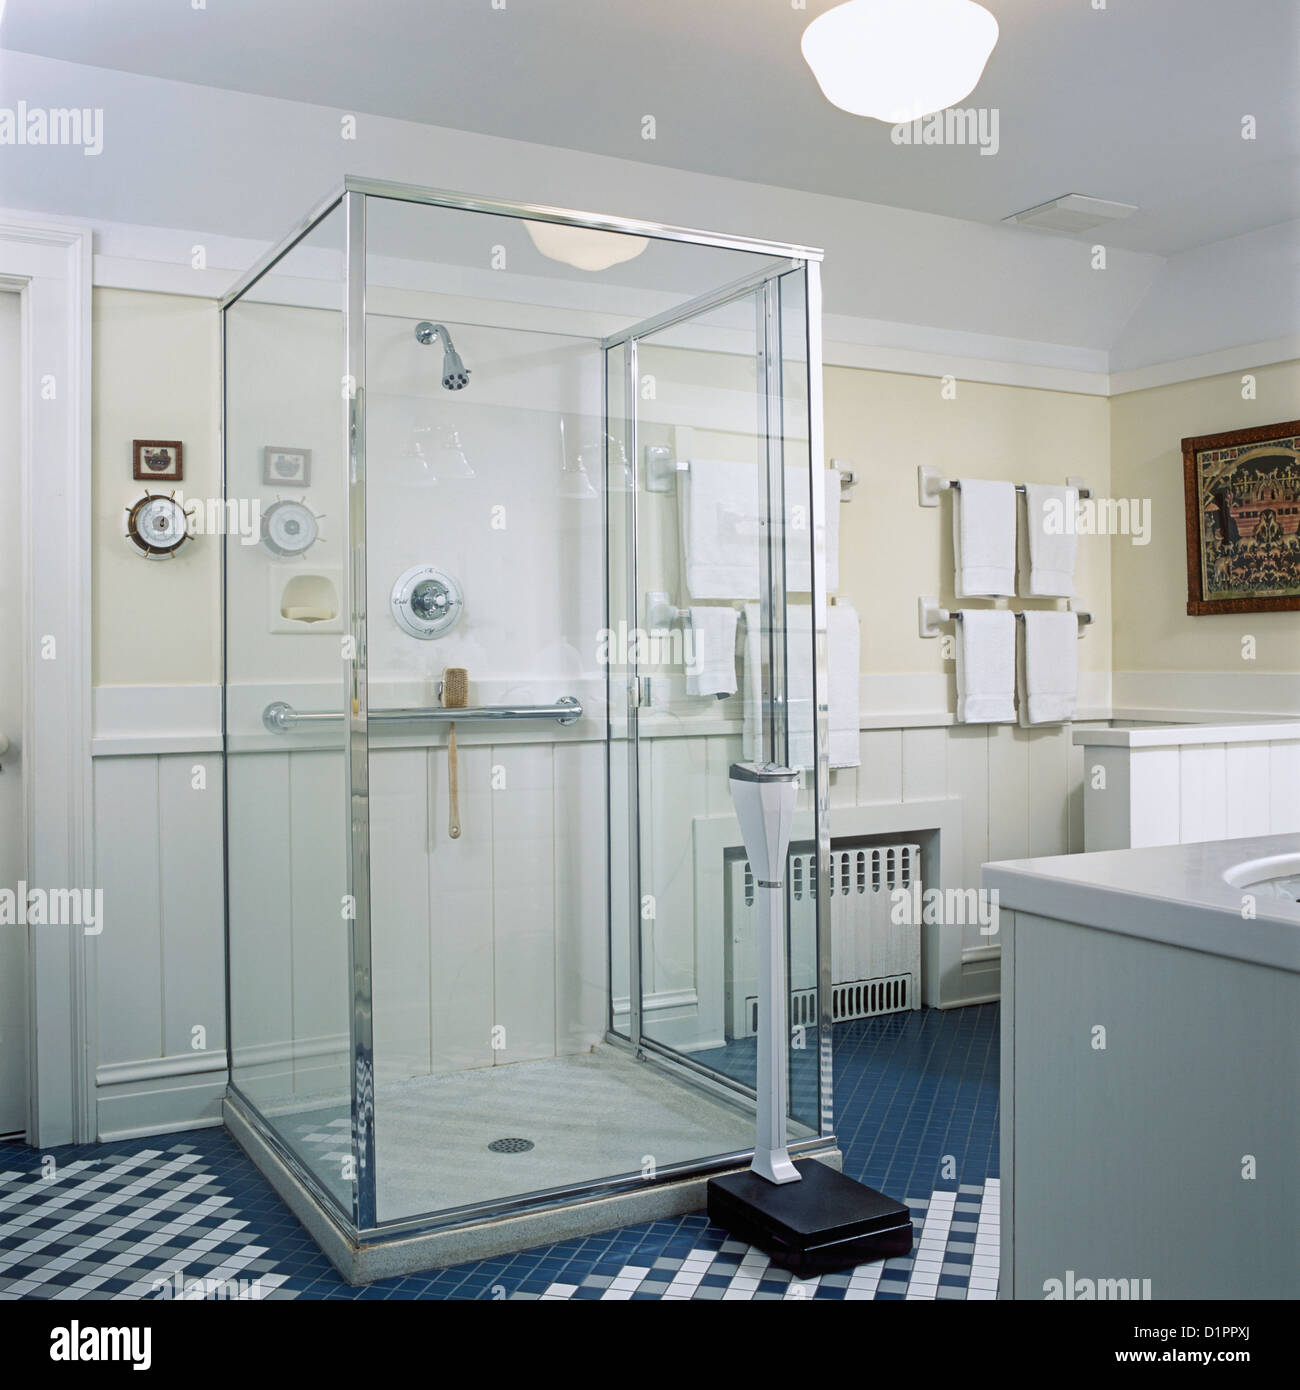 BATHROOMS: View towards glass box shower stall, teal blue and white tile floor, weighing scale, white towels. Stock Photo